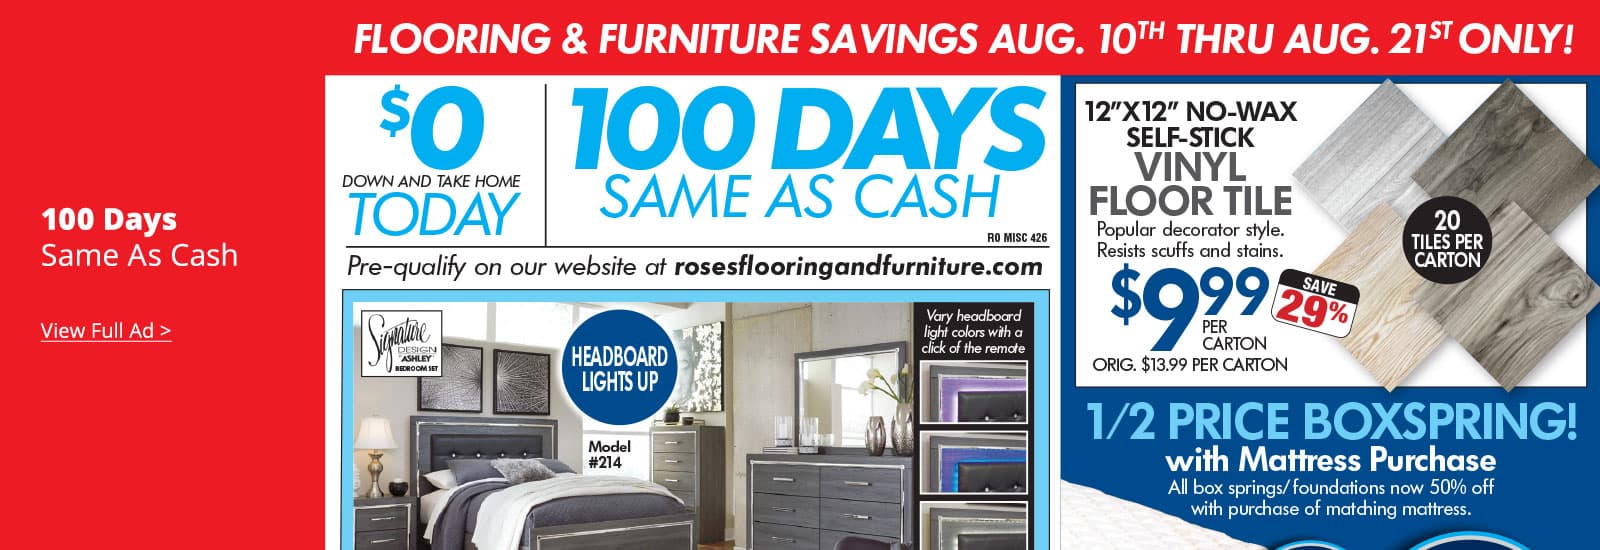 Flooring and Furniture Savings Aug. 10 - Aug. 21 Only! - View Our Ad